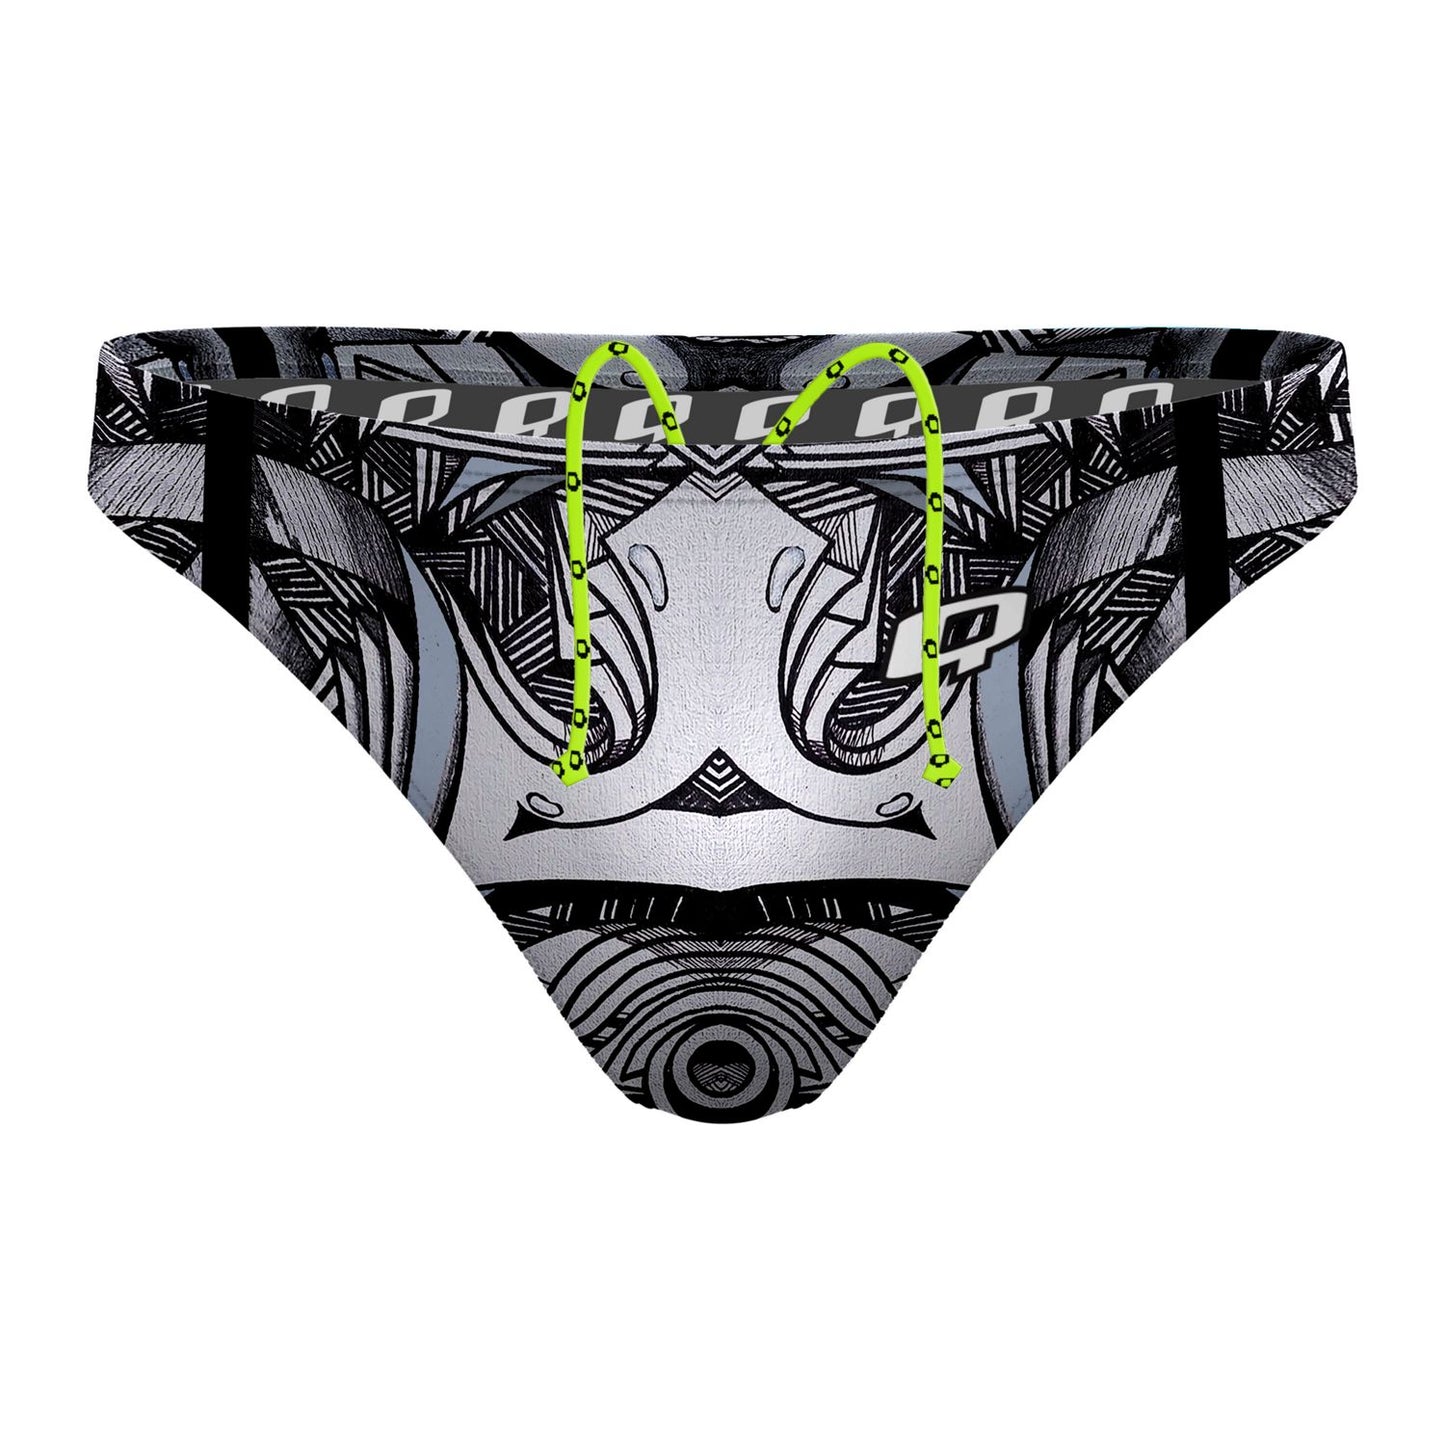 Navel Waterpolo Brief